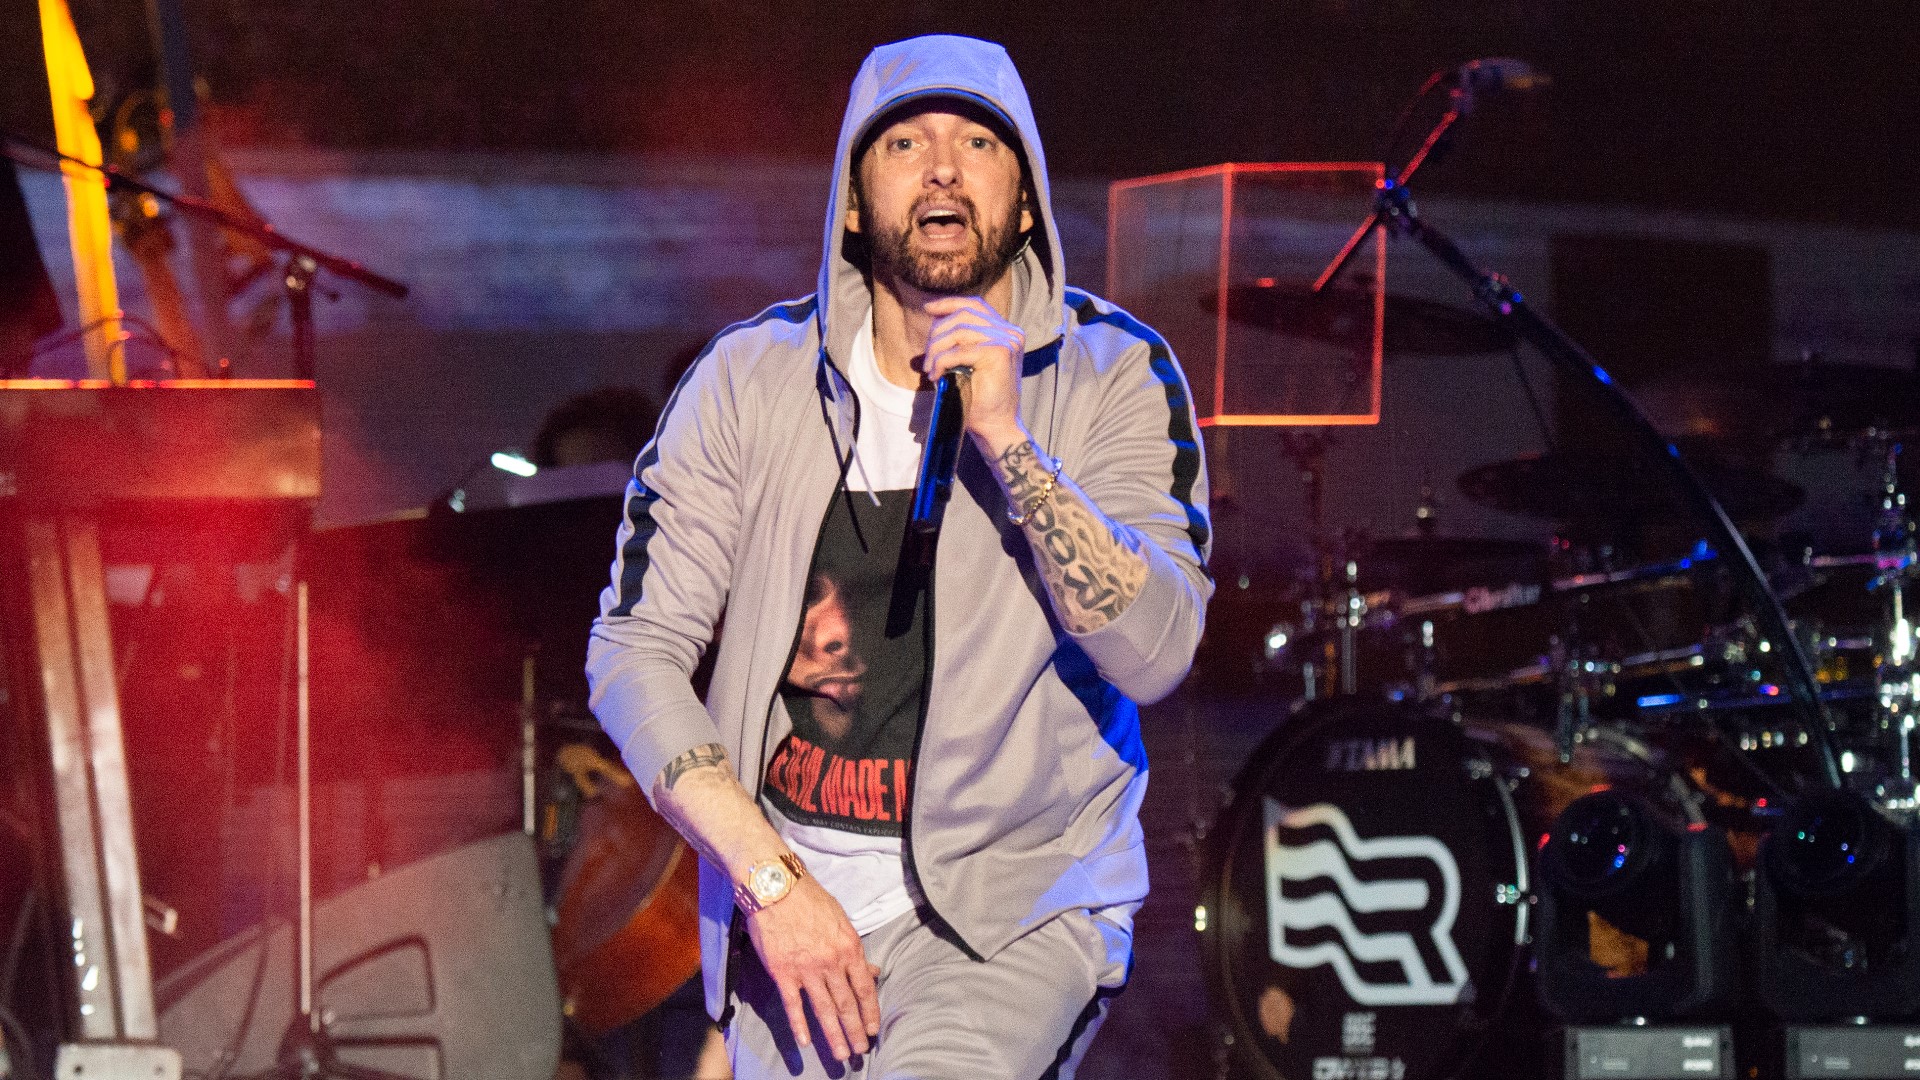 Eminem, Pat Benatar, Dolly Parton and Lionel Richie are among the 17 induction nominees for the Rock and Roll Hall of Fame in 2022.